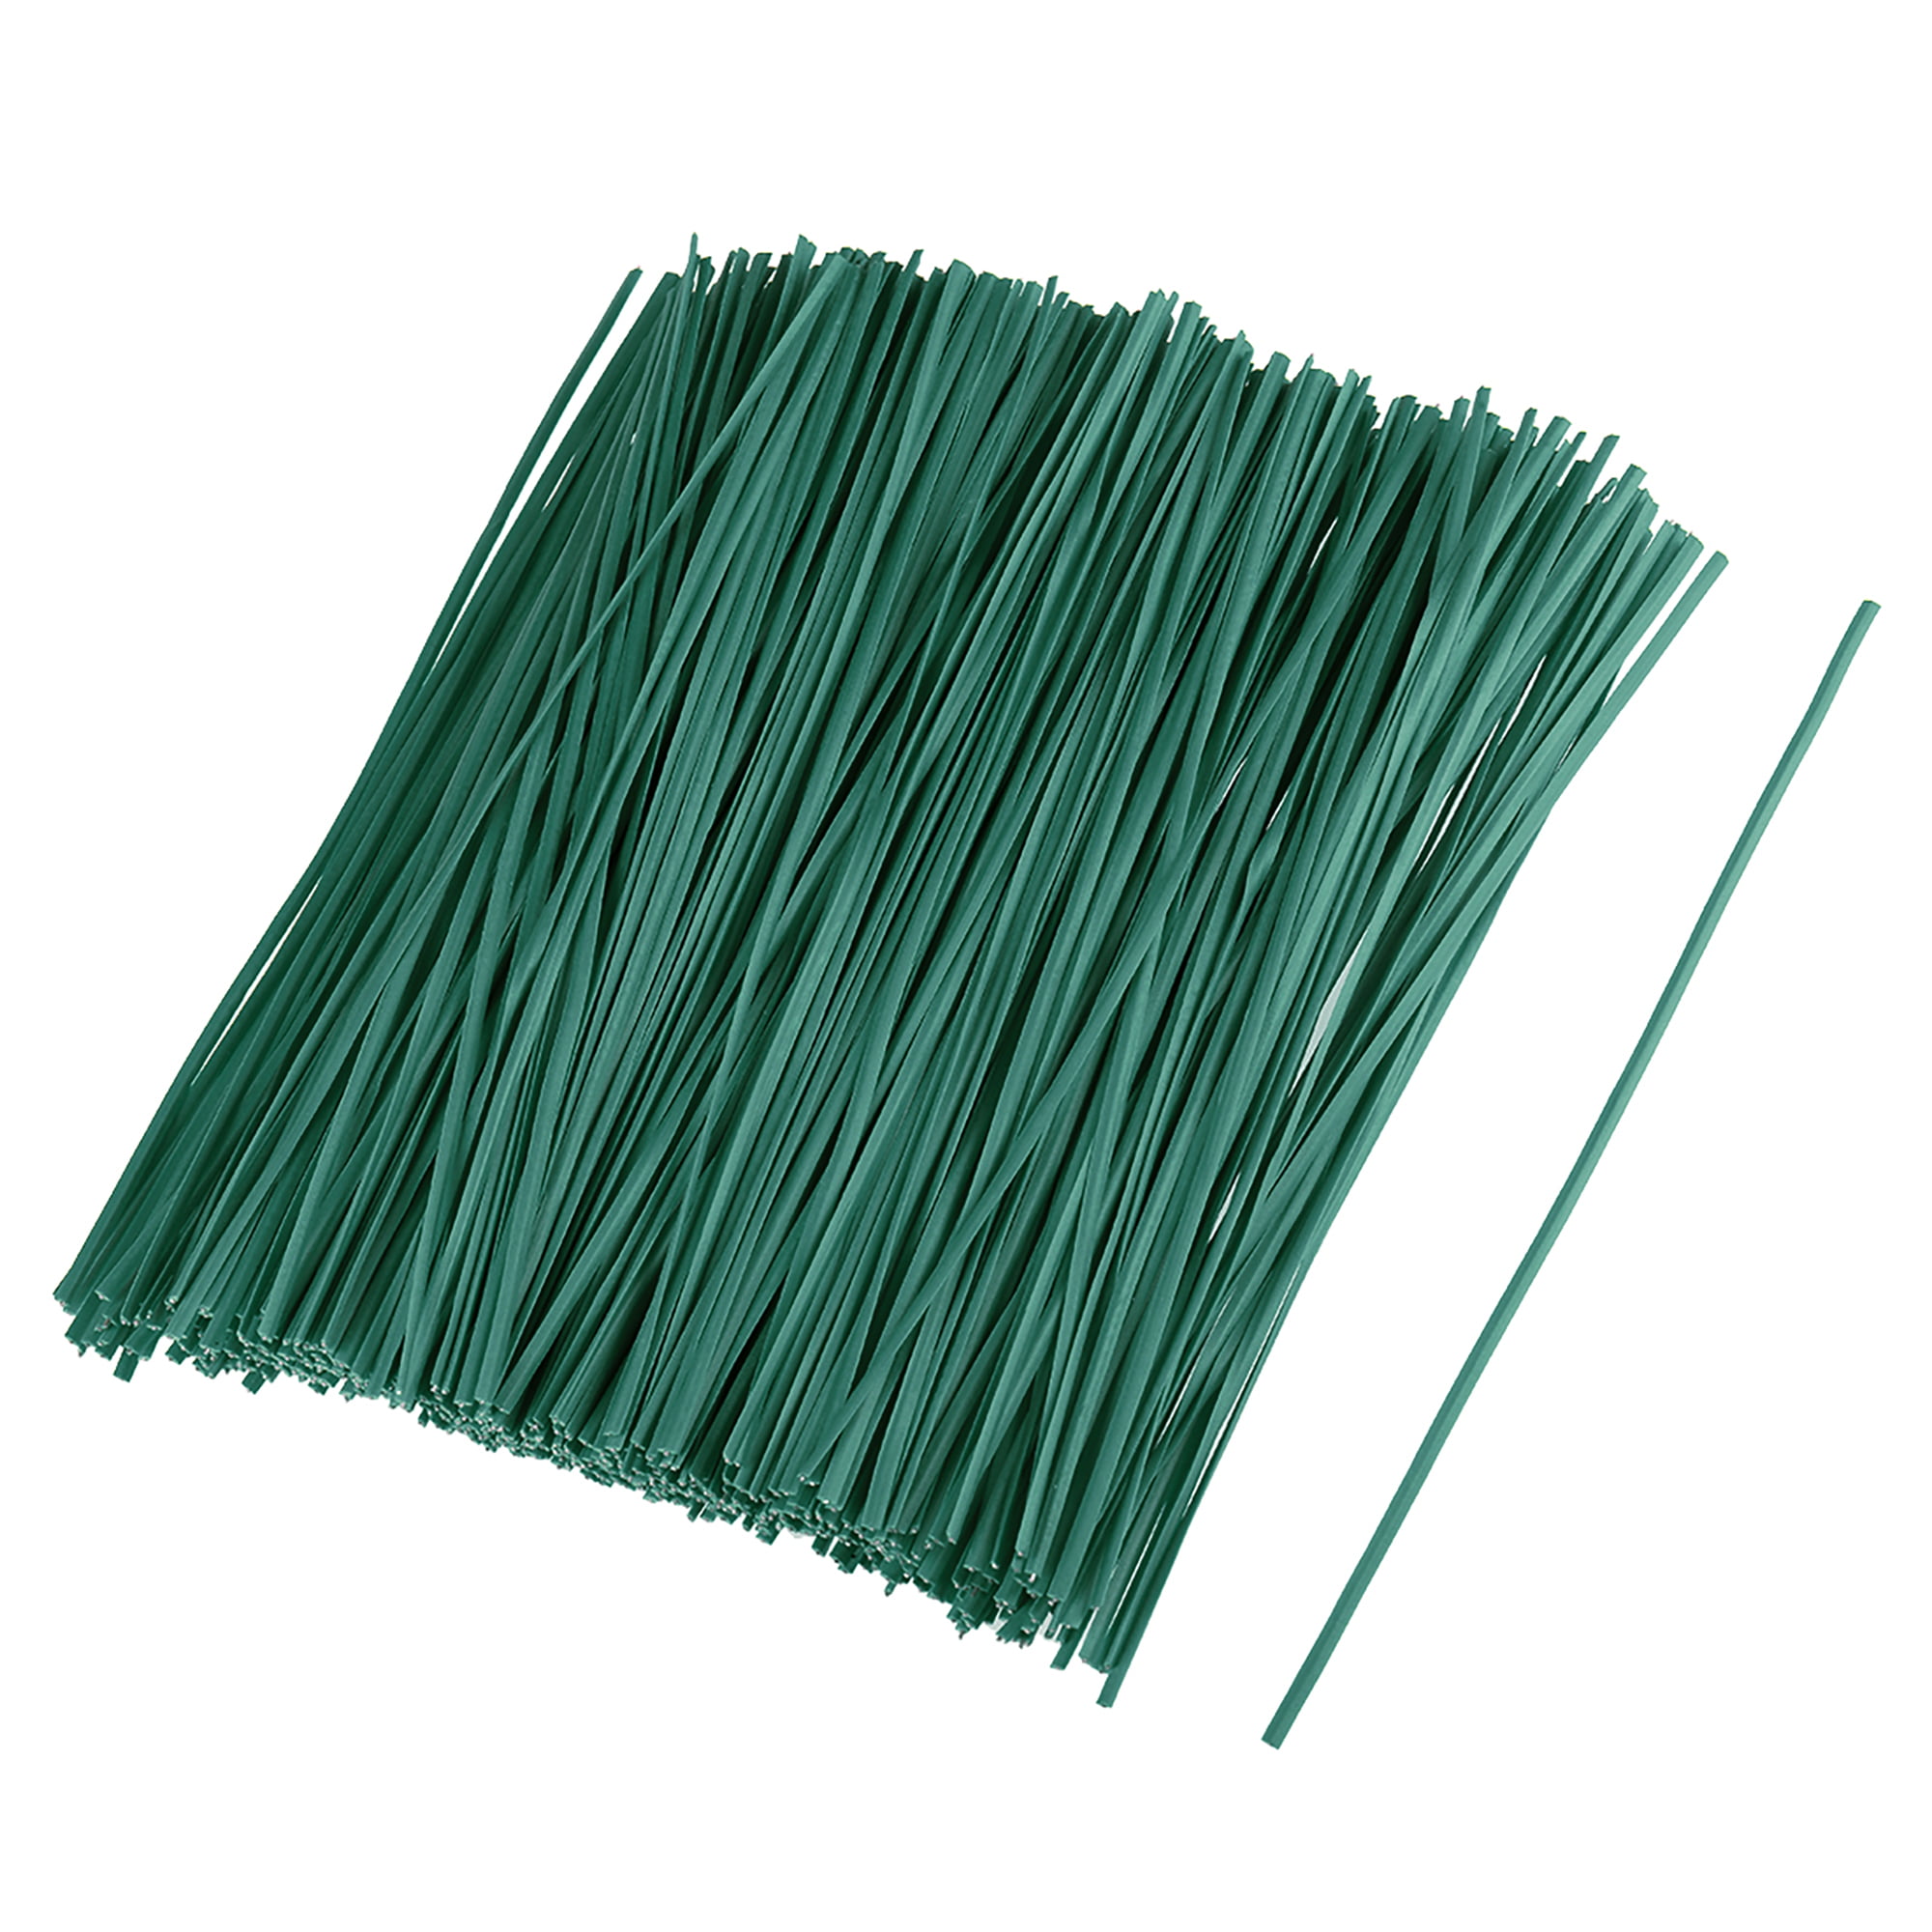 6 Inch Paper Twist Ties Long Stronger Cable Ties Green 1000pcs ...